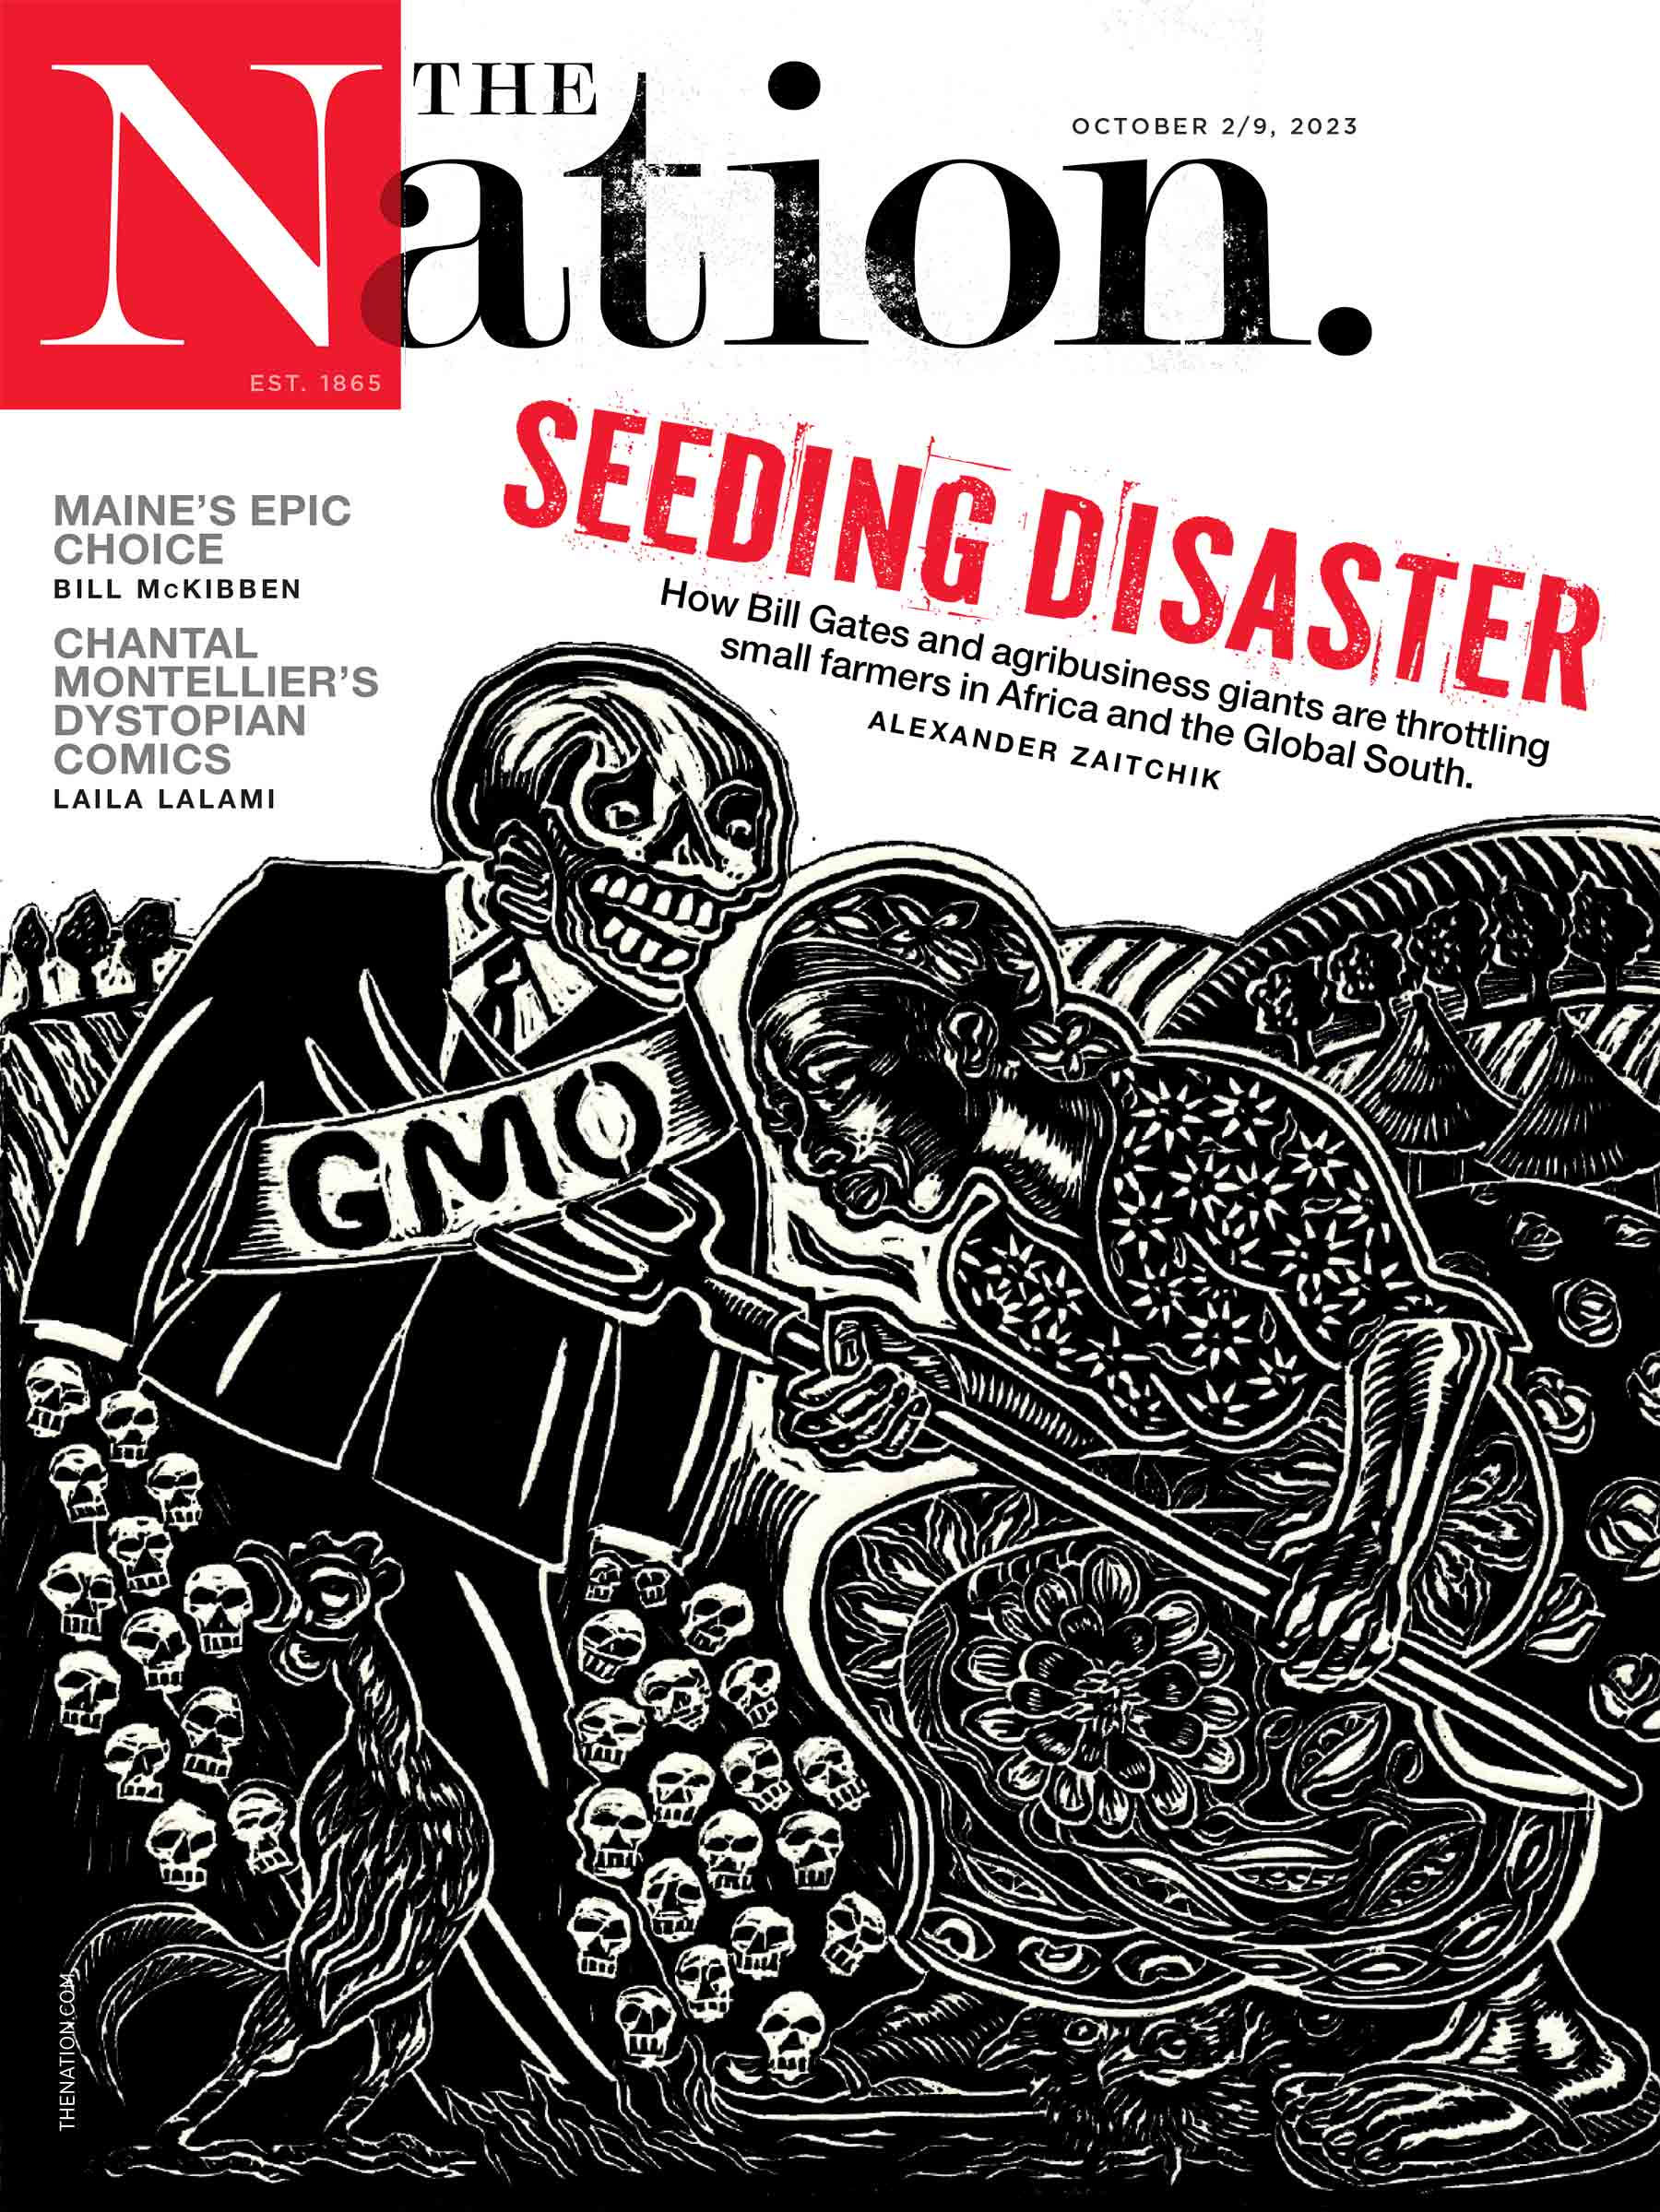 Cover of the 2/9 October 2023 issue